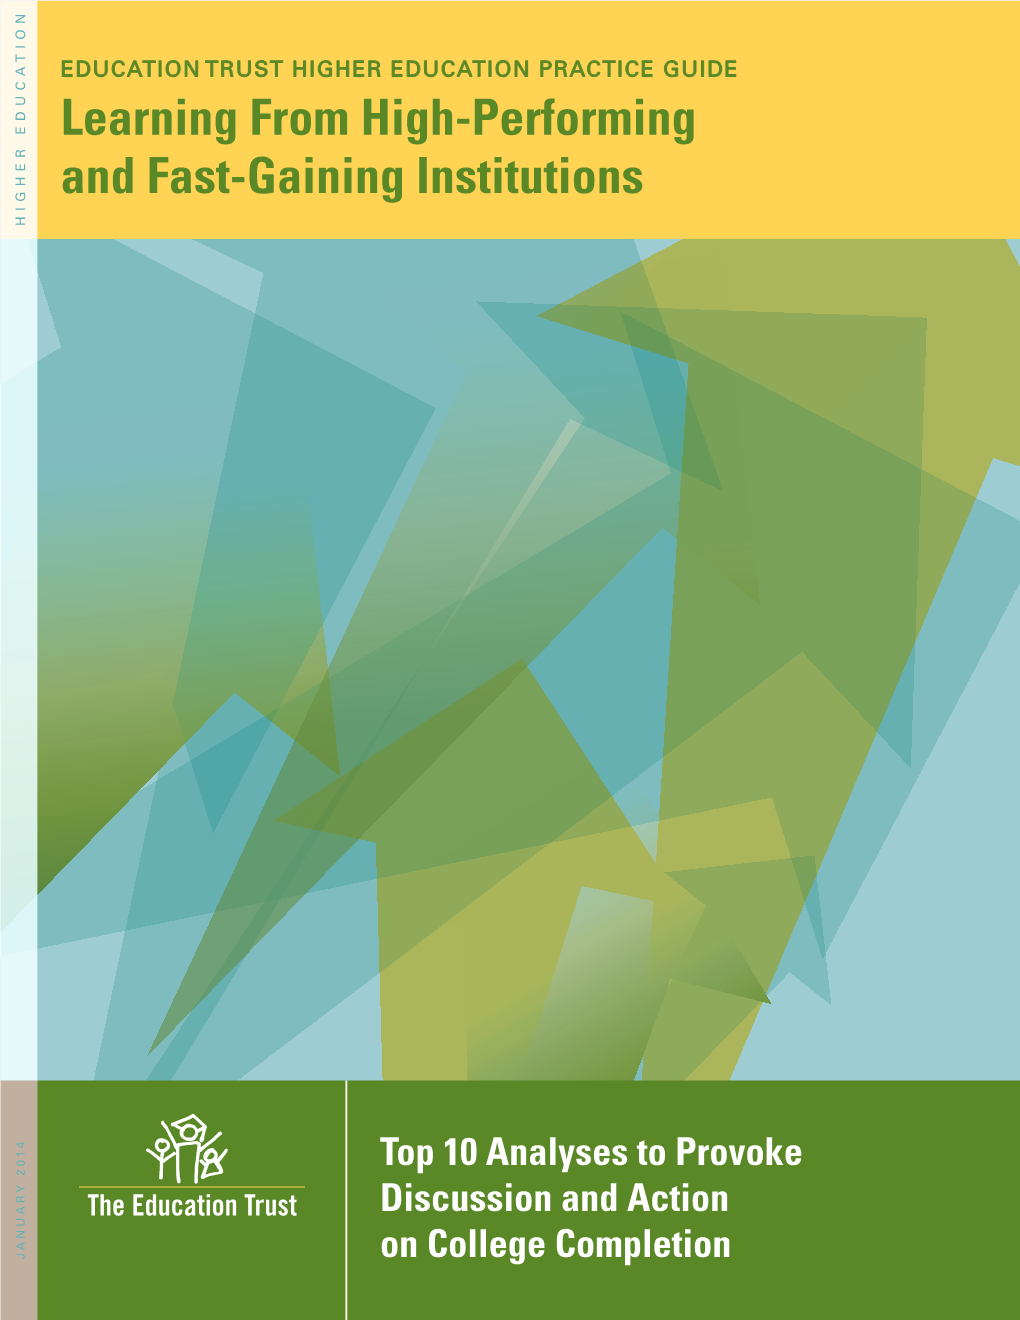 Learning from High-Performing and Fast-Gaining Institutions HIGHER EDUCATION